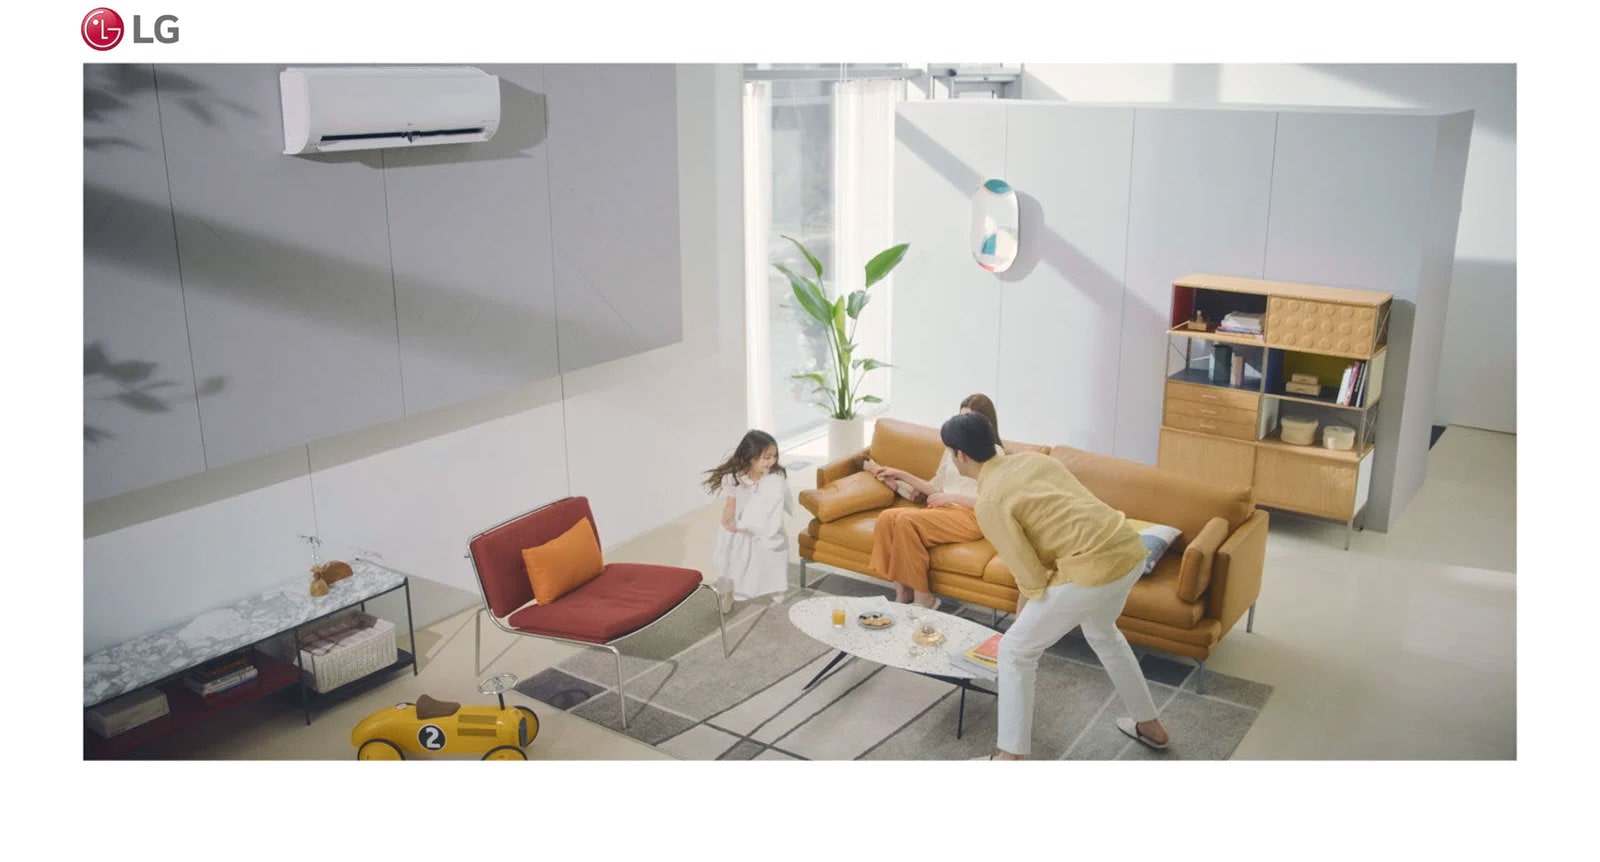 A family plays in a living room and the air condition sits in the top of the picture.